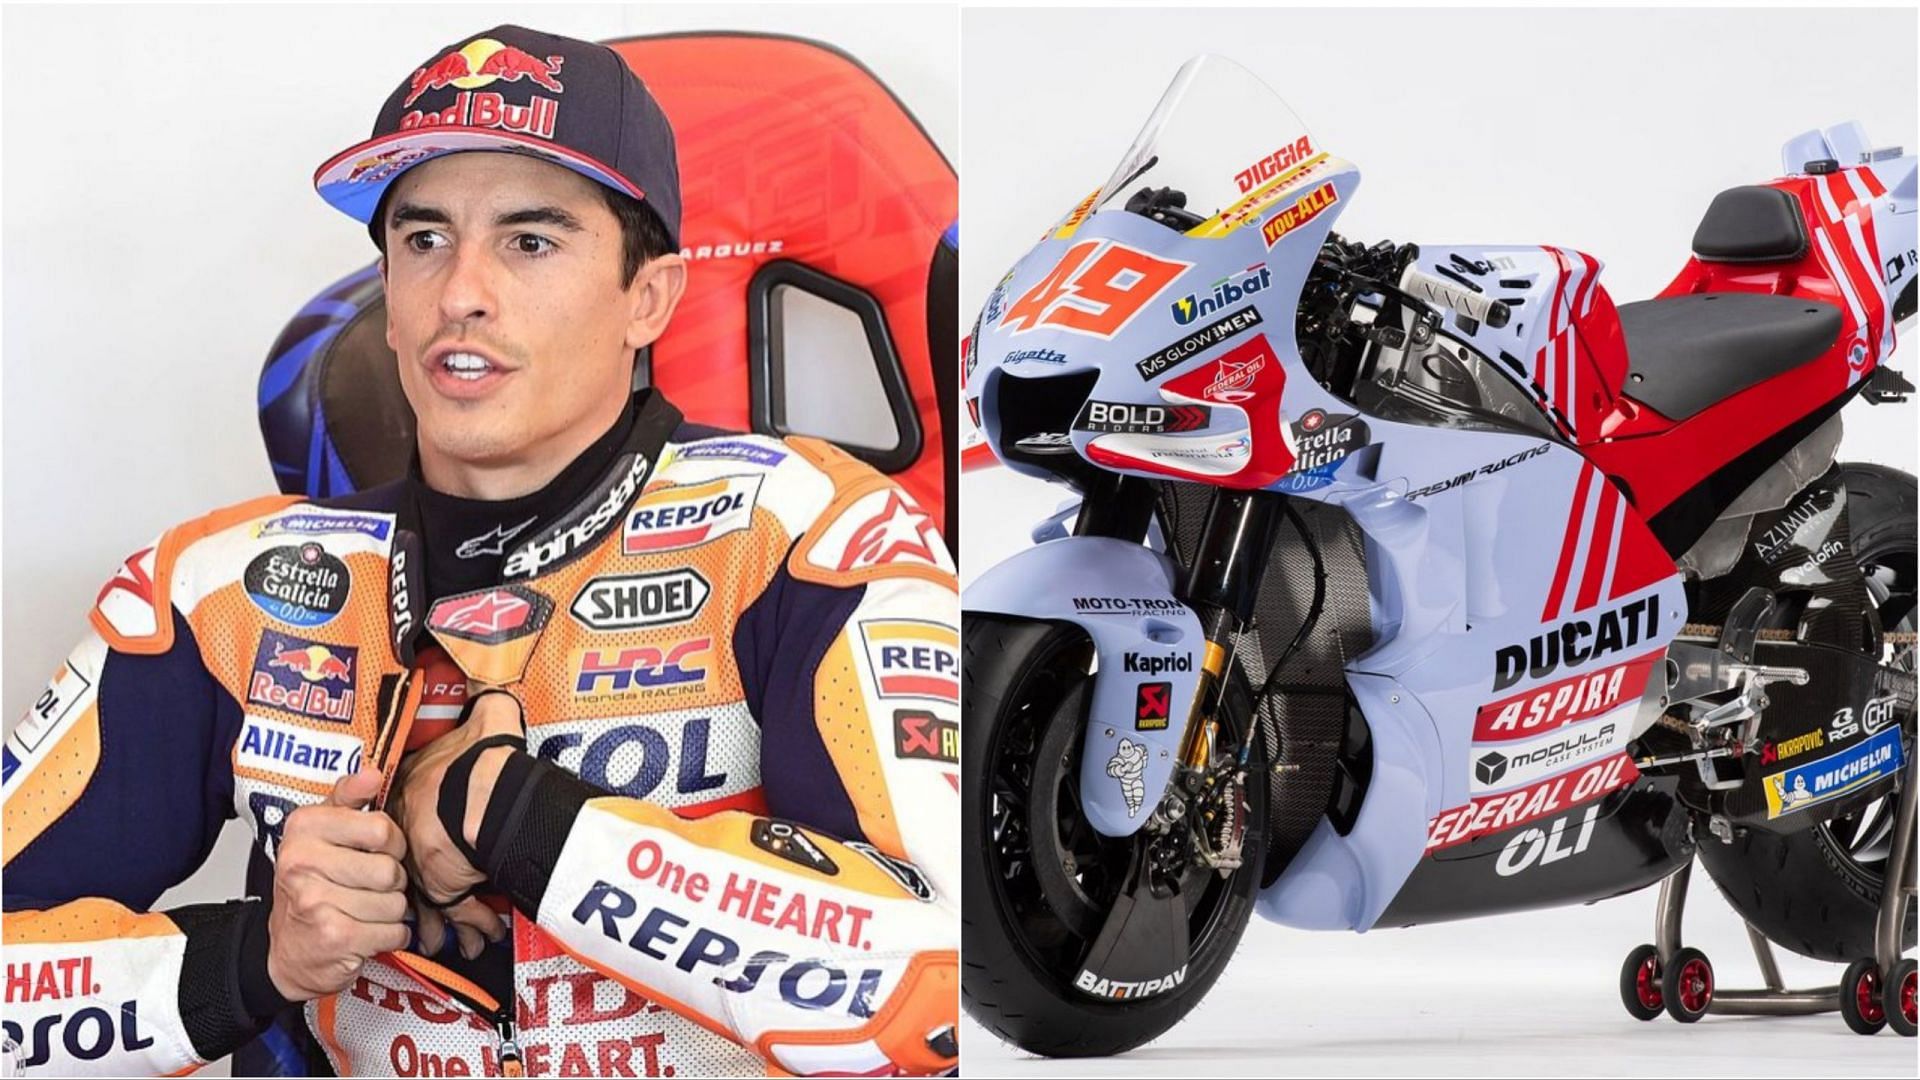 Marc Marquez to Gresini Ducati rumors made the rounds this weekend